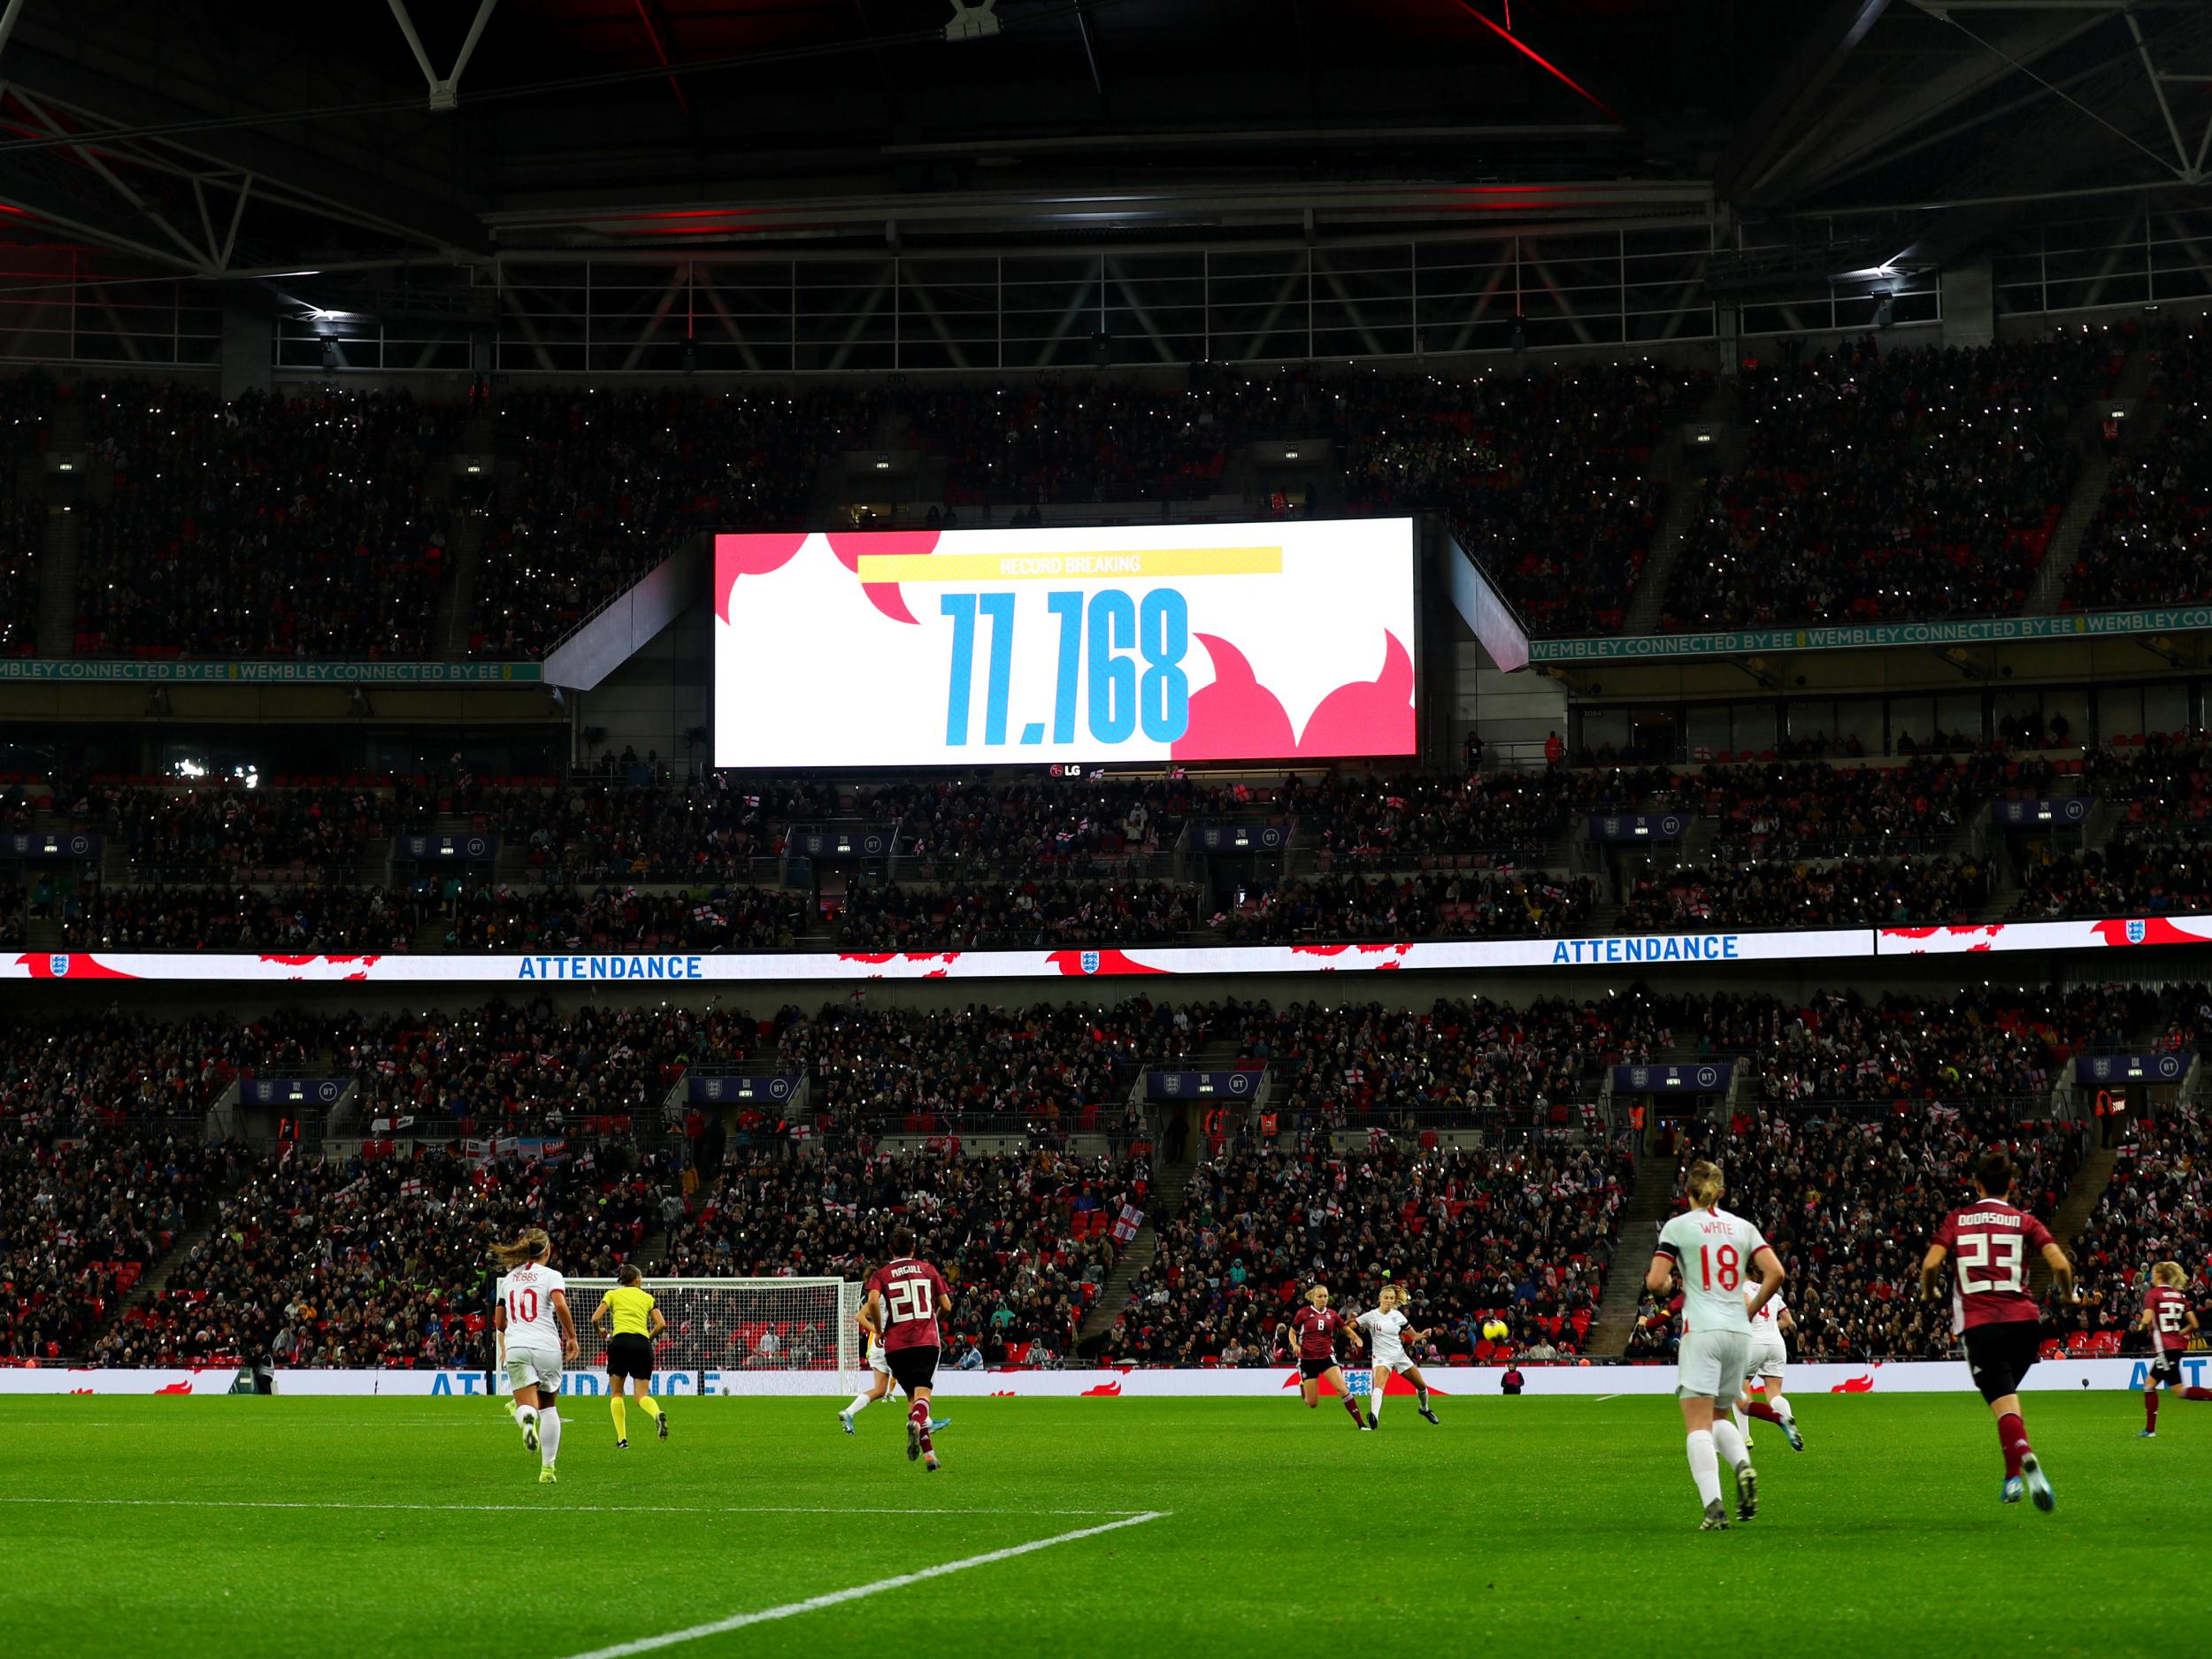 Nearly 80,000 people were in attendance as Germany broke English hearts late on